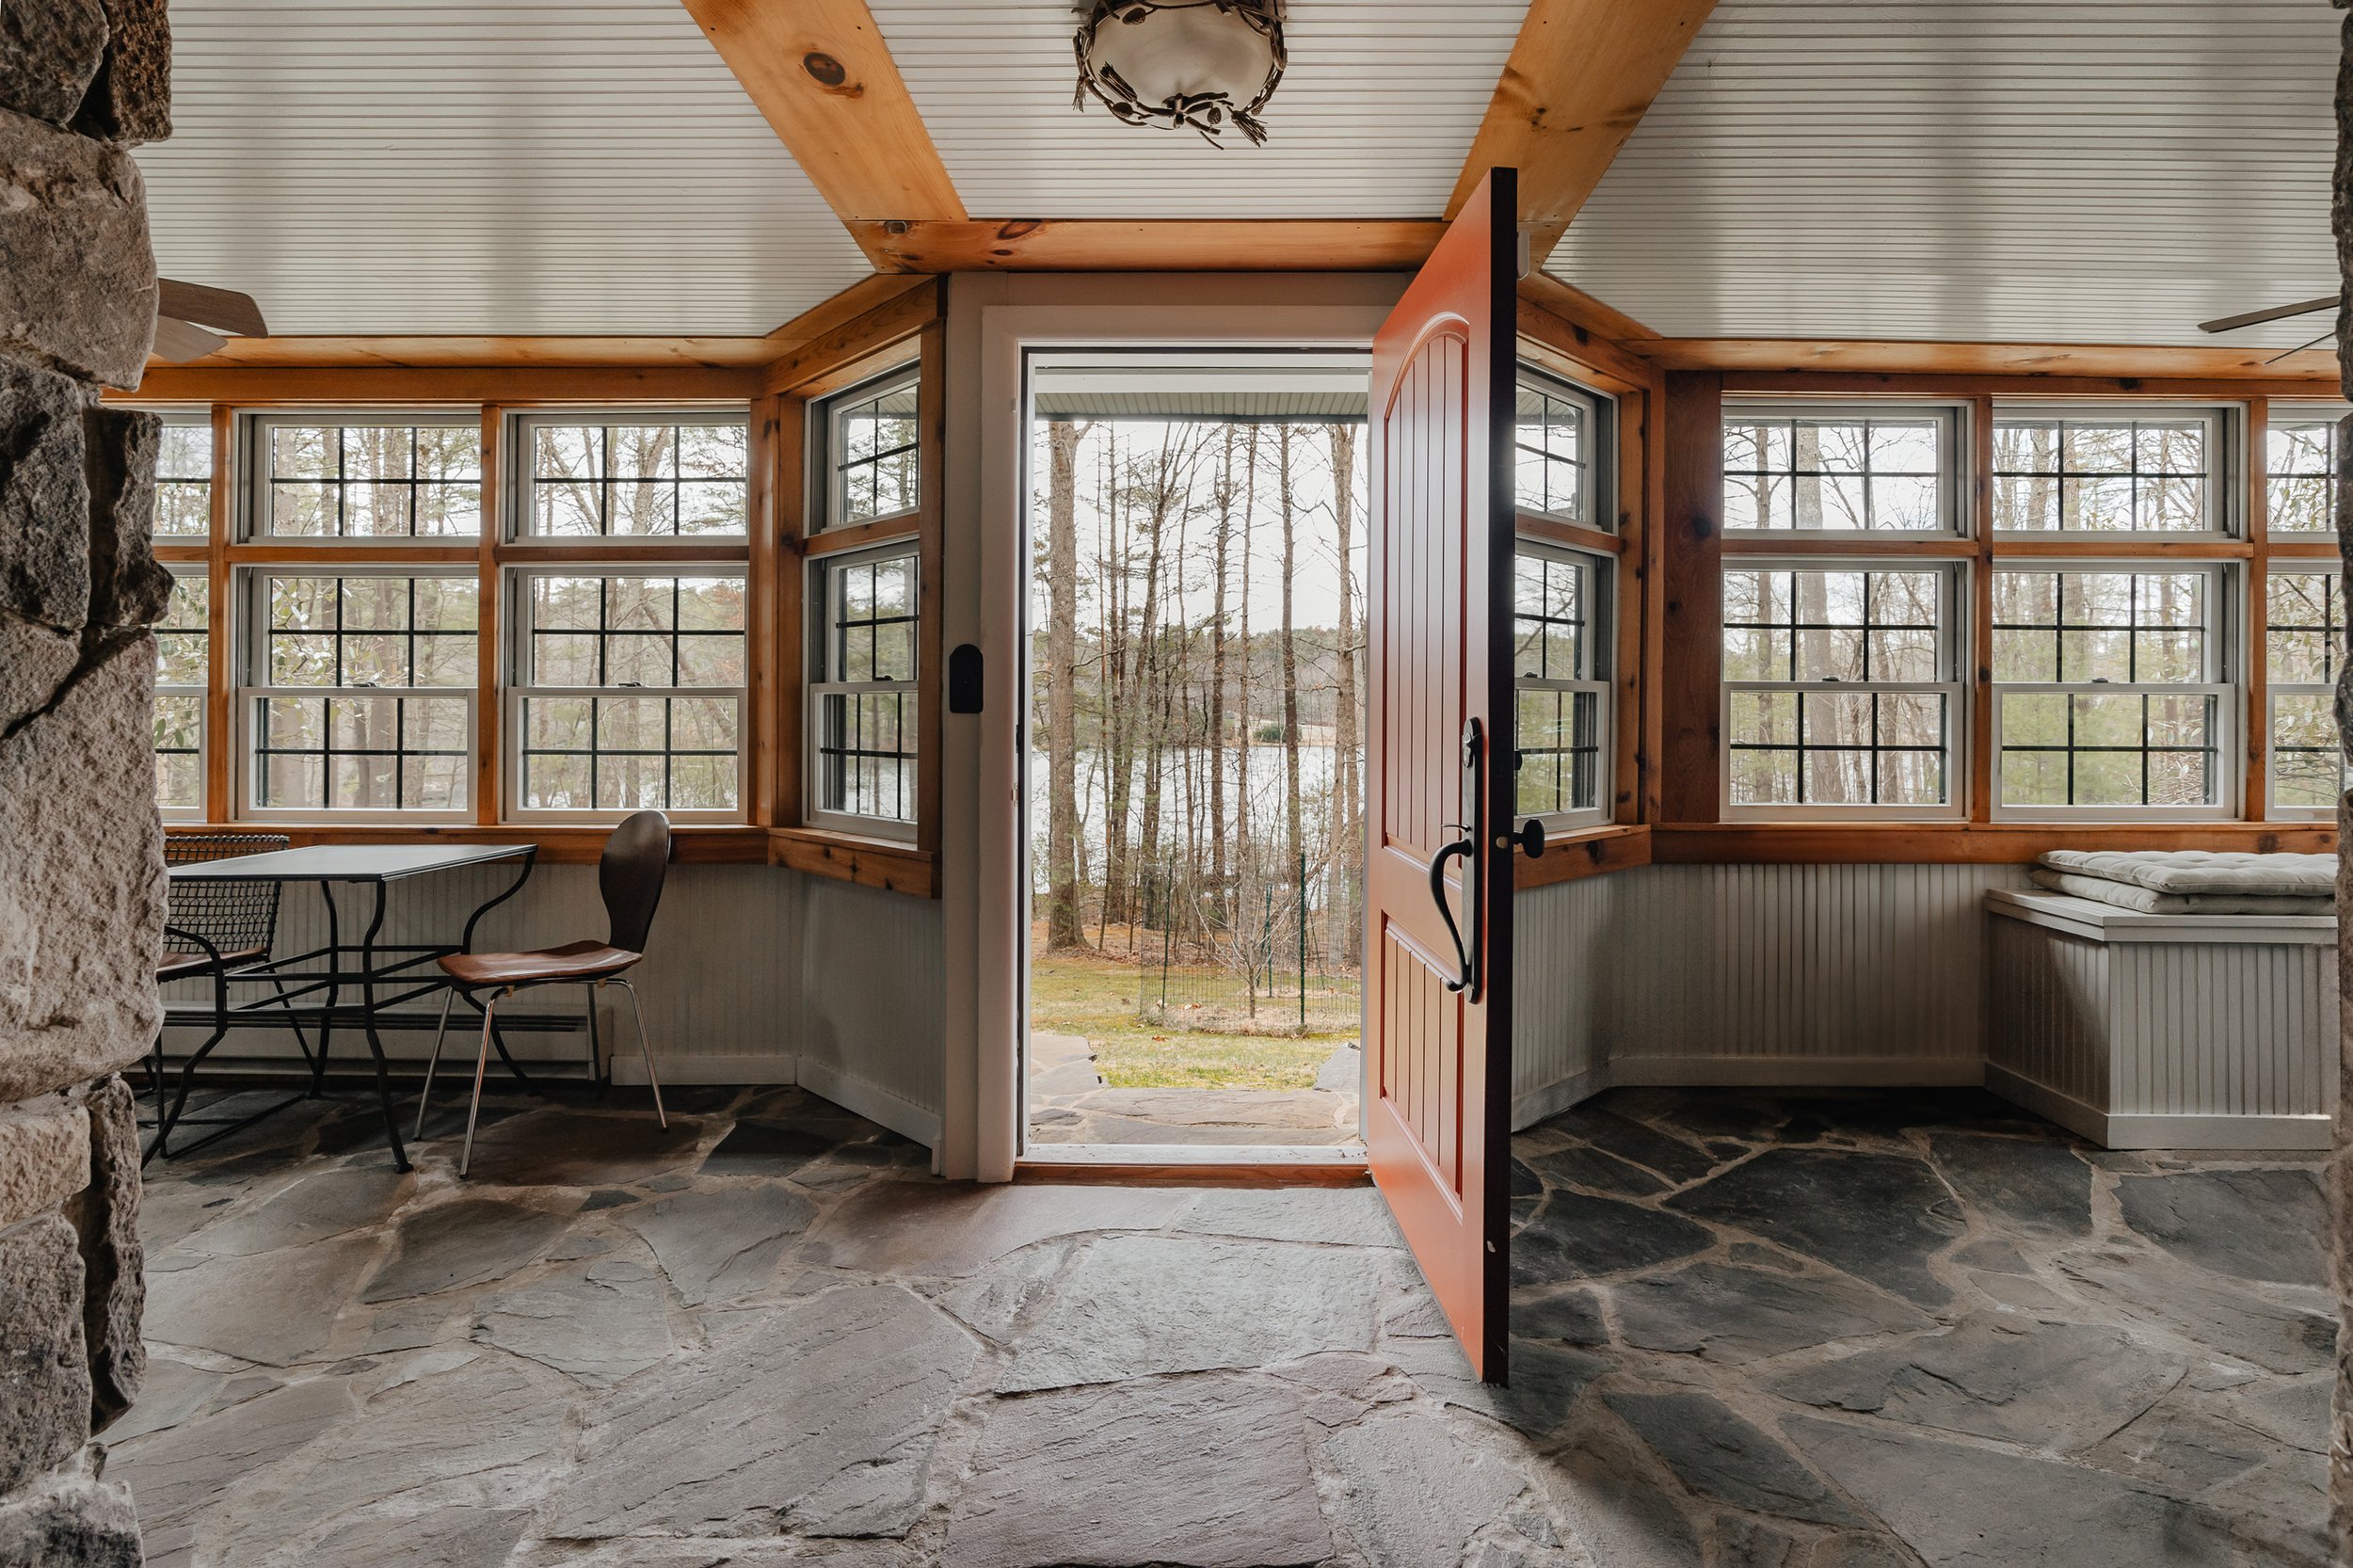 Home for sale in Eldred, NY